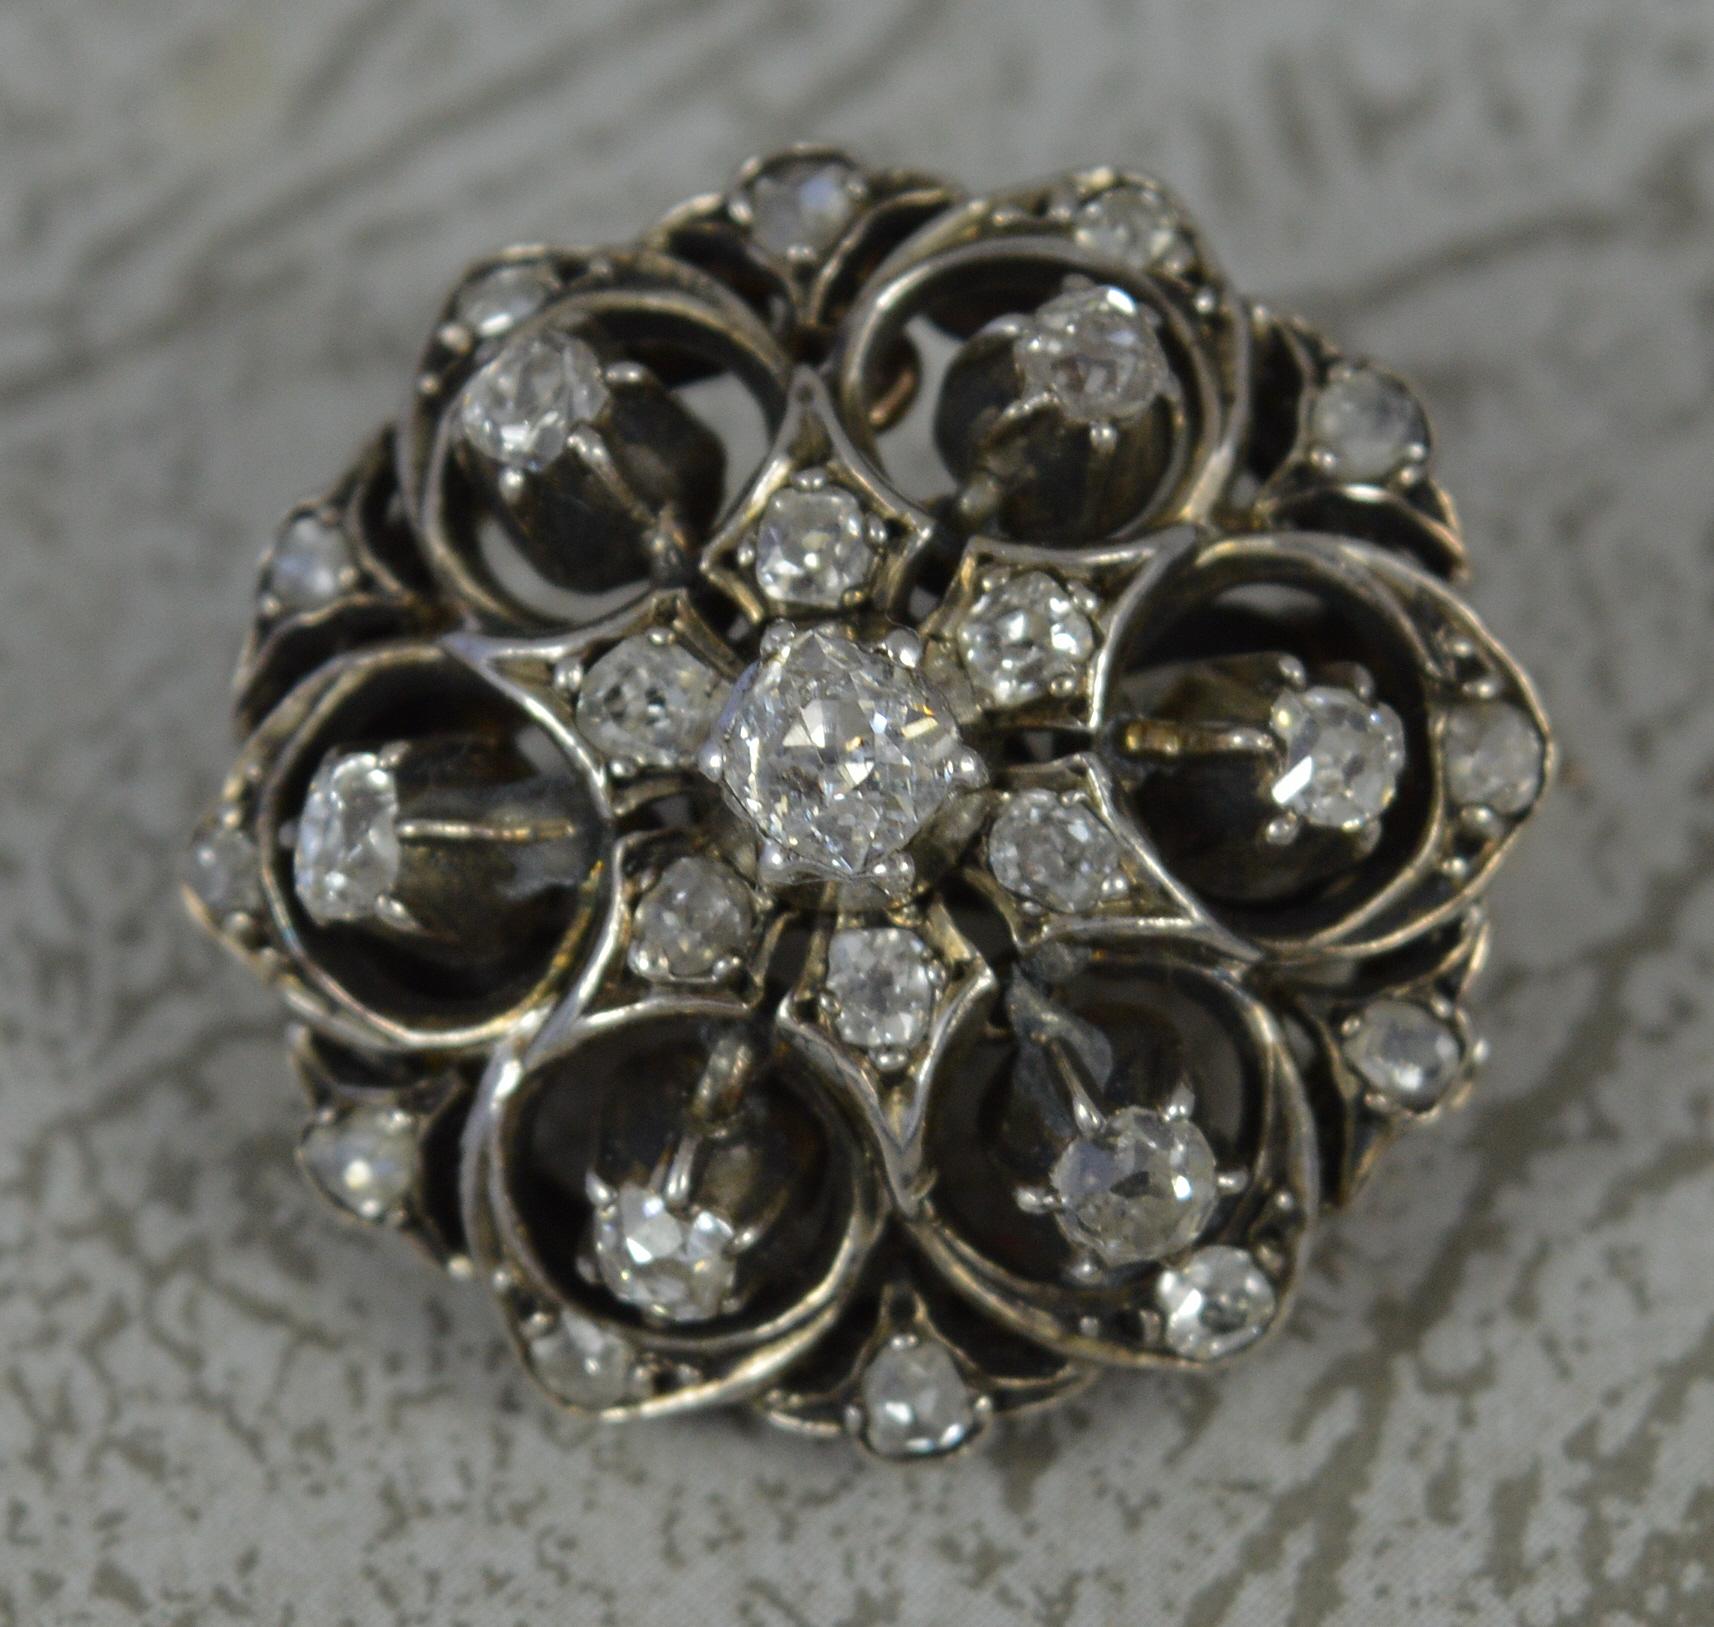 A stunning early Victorian period brooch.
Solid 15 carat rose gold example with a silver head setting.
Designed with many old mine cut diamonds set throughout. Set with over one carat of natural diamonds. Clean, bright and sparkly.
A circular shaped